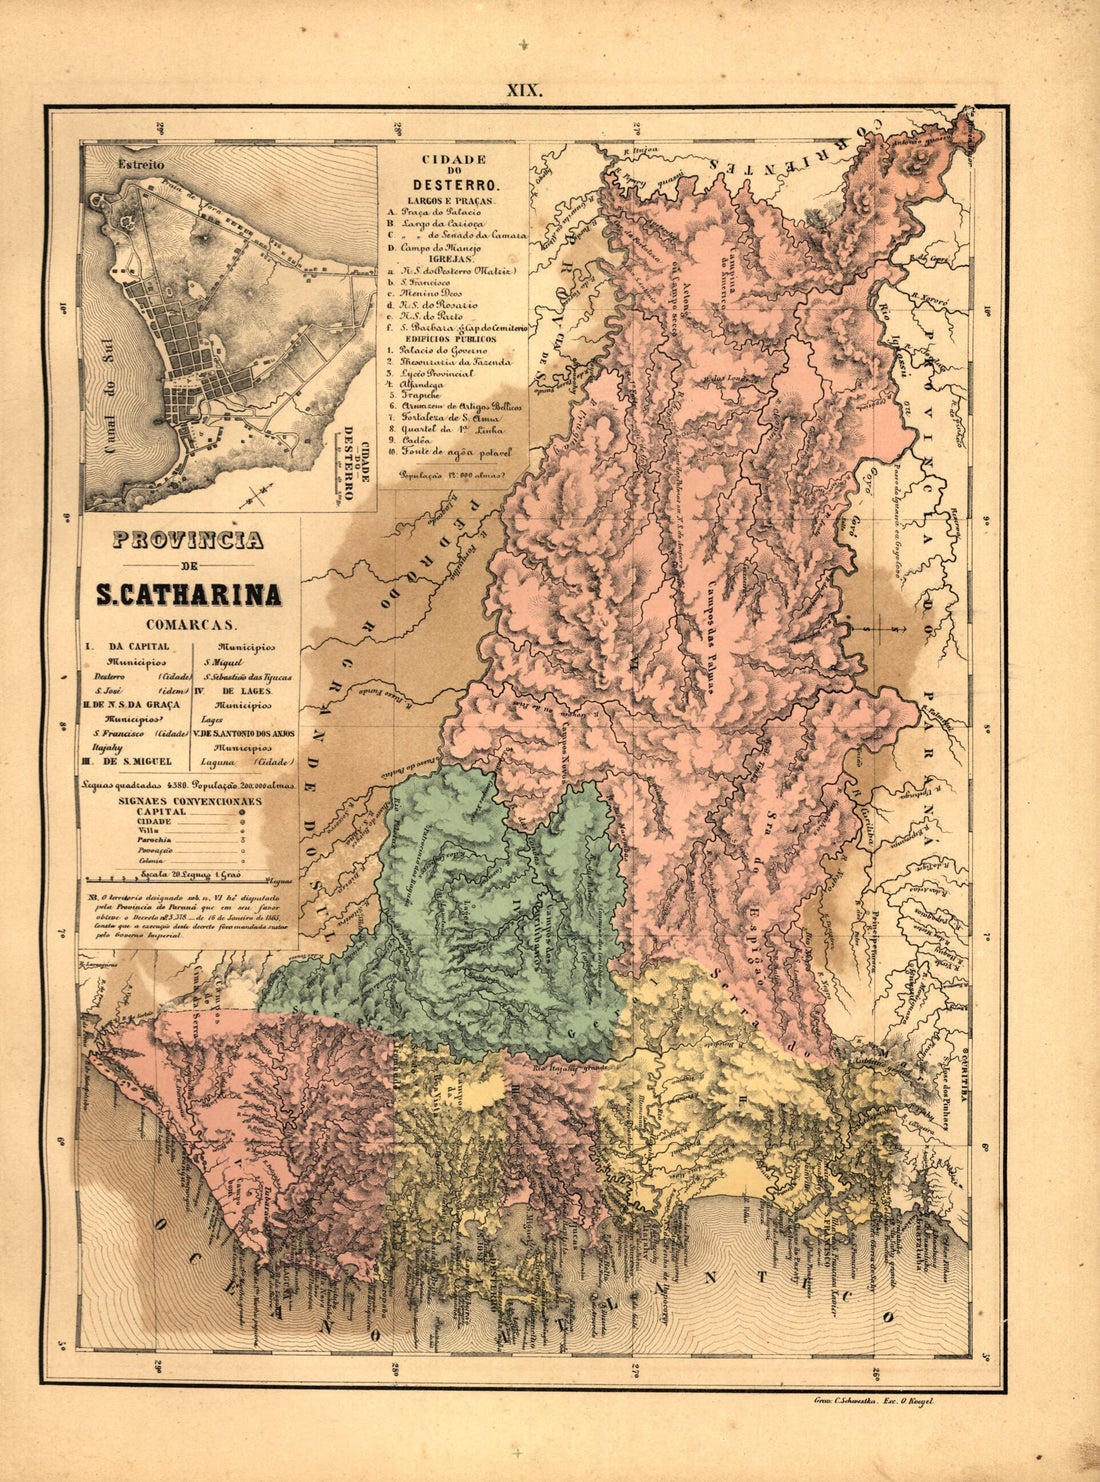 This old map of Provincia De S. Catharina from Atlas Do Imperio Do Brazil from 1868 was created by Cândido Mendes in 1868